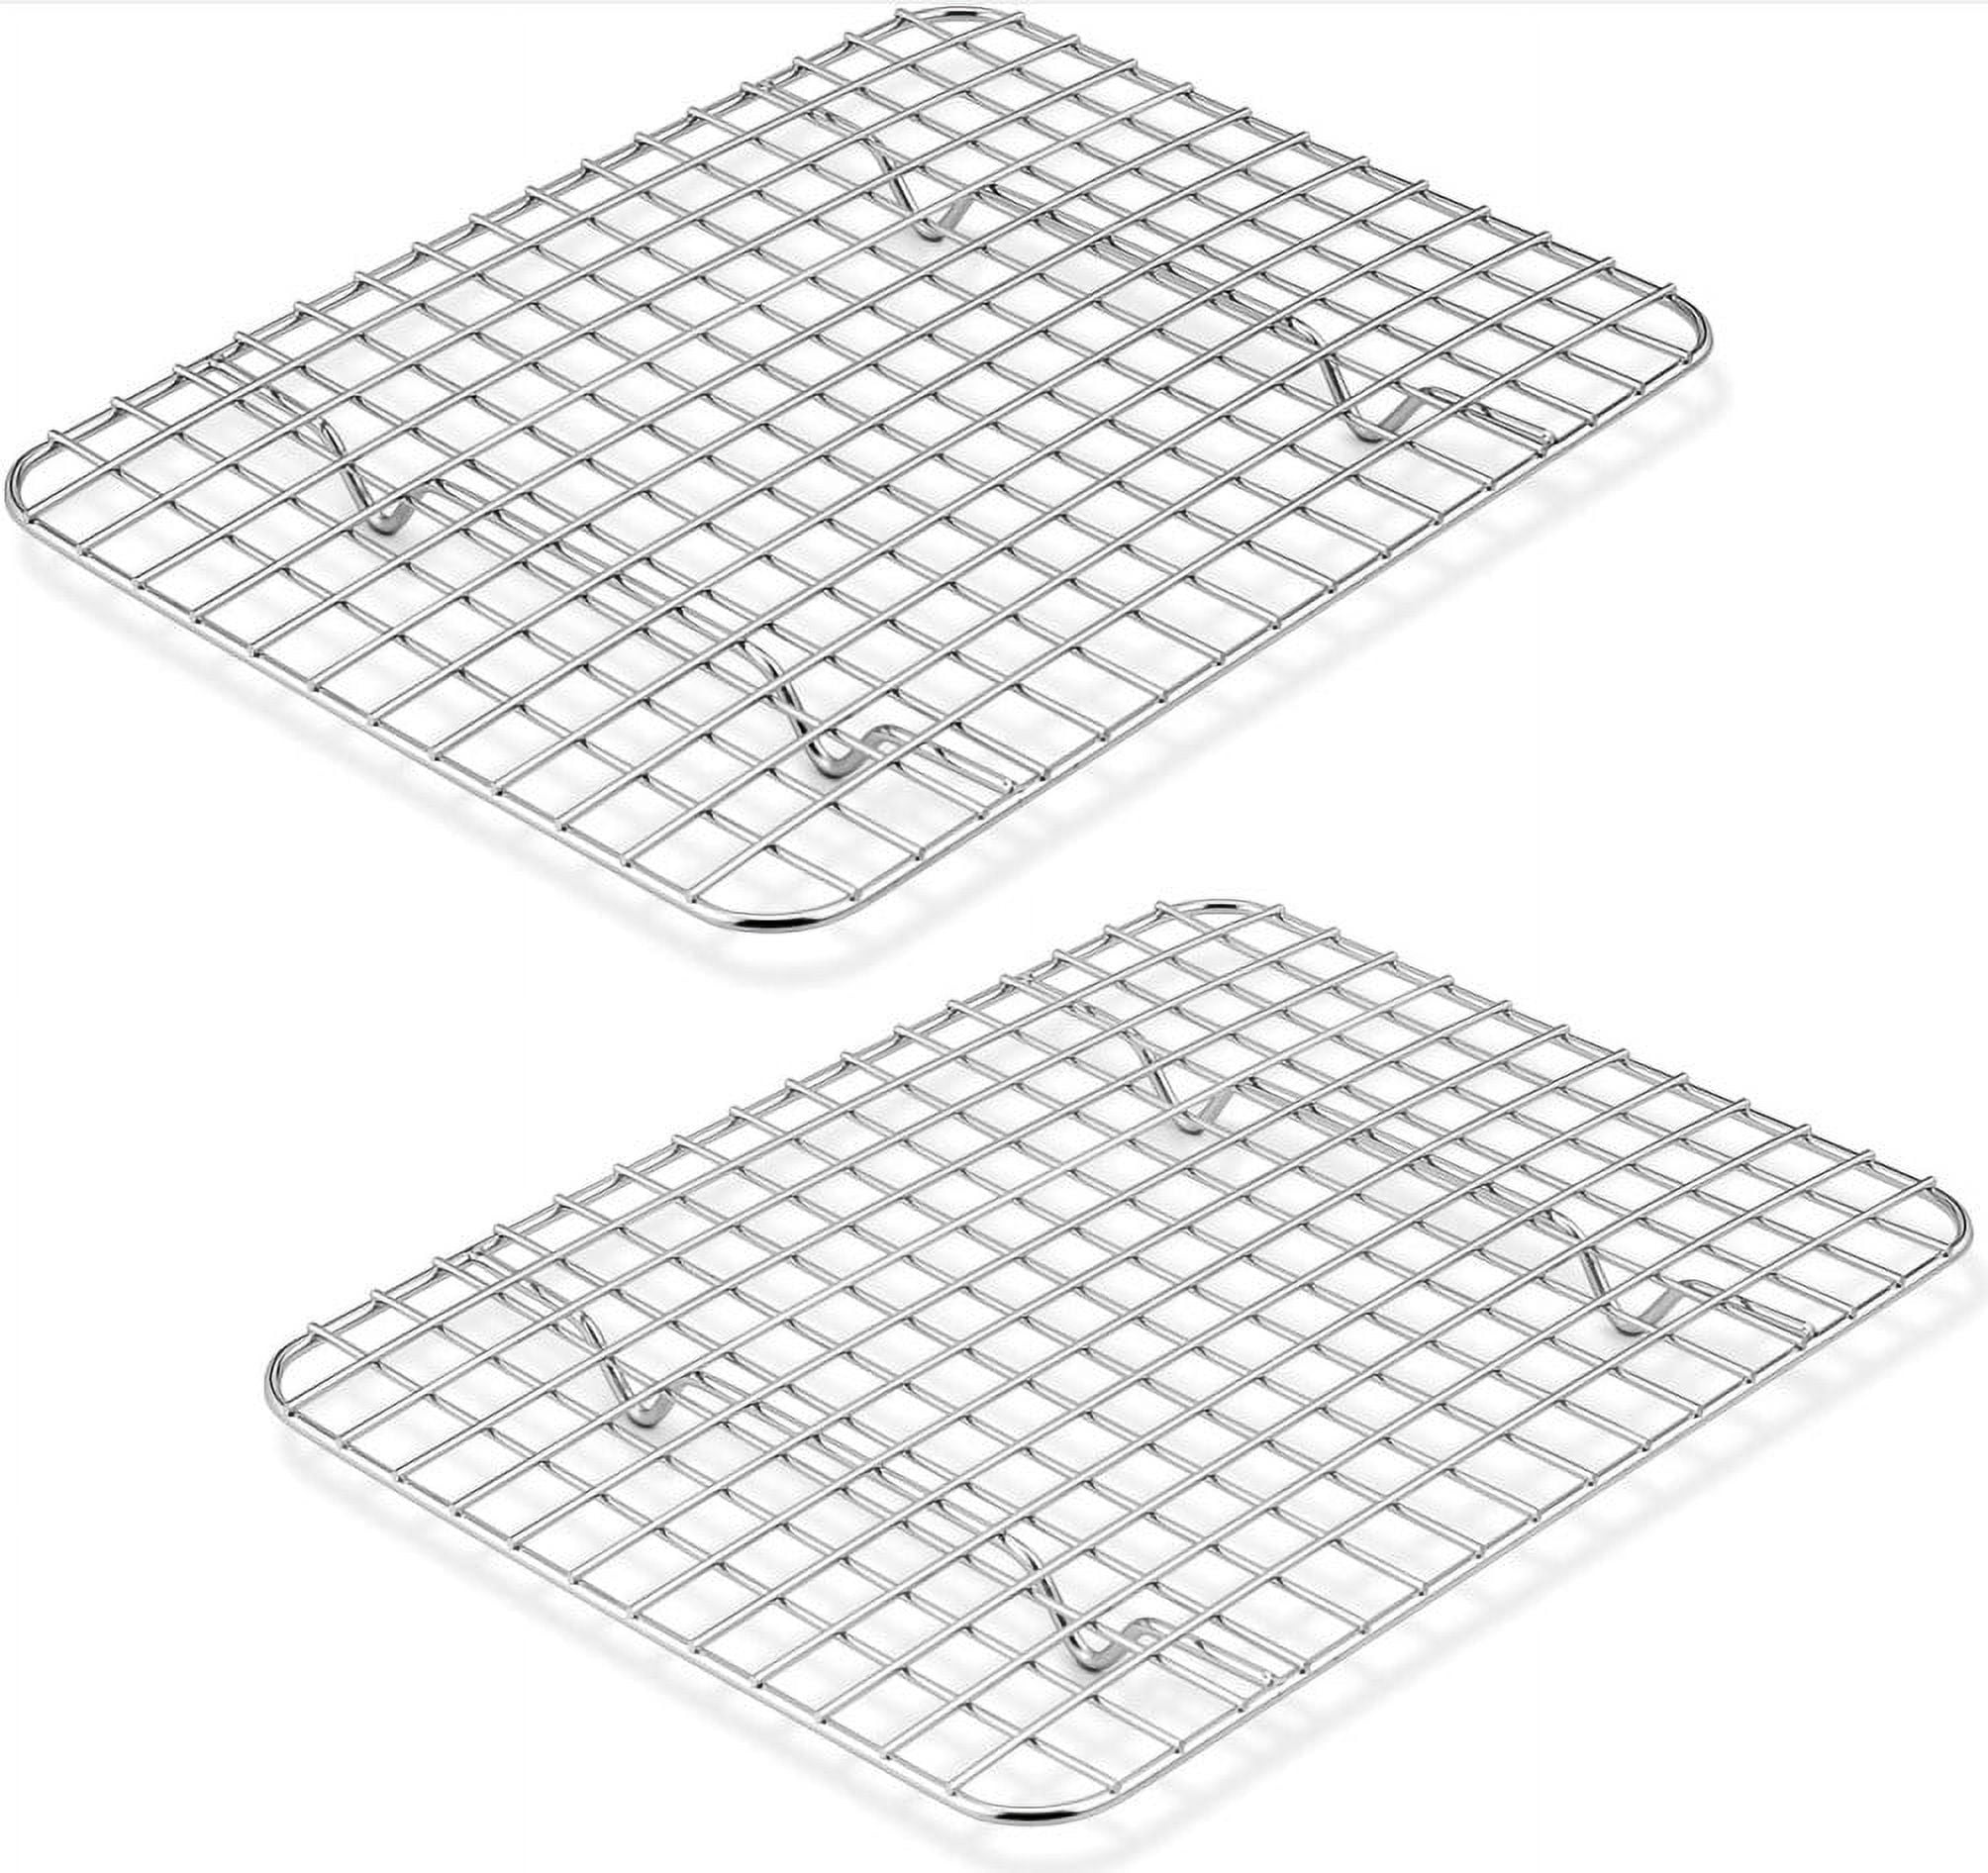 Baking Cooling Racks Pack of 4-16.6''x11.6'', P&P CHEF Stainless Steel Wire  Cooking Rack for Oven Use Cooling Drying Roasting, Non-toxic & Easy Clean